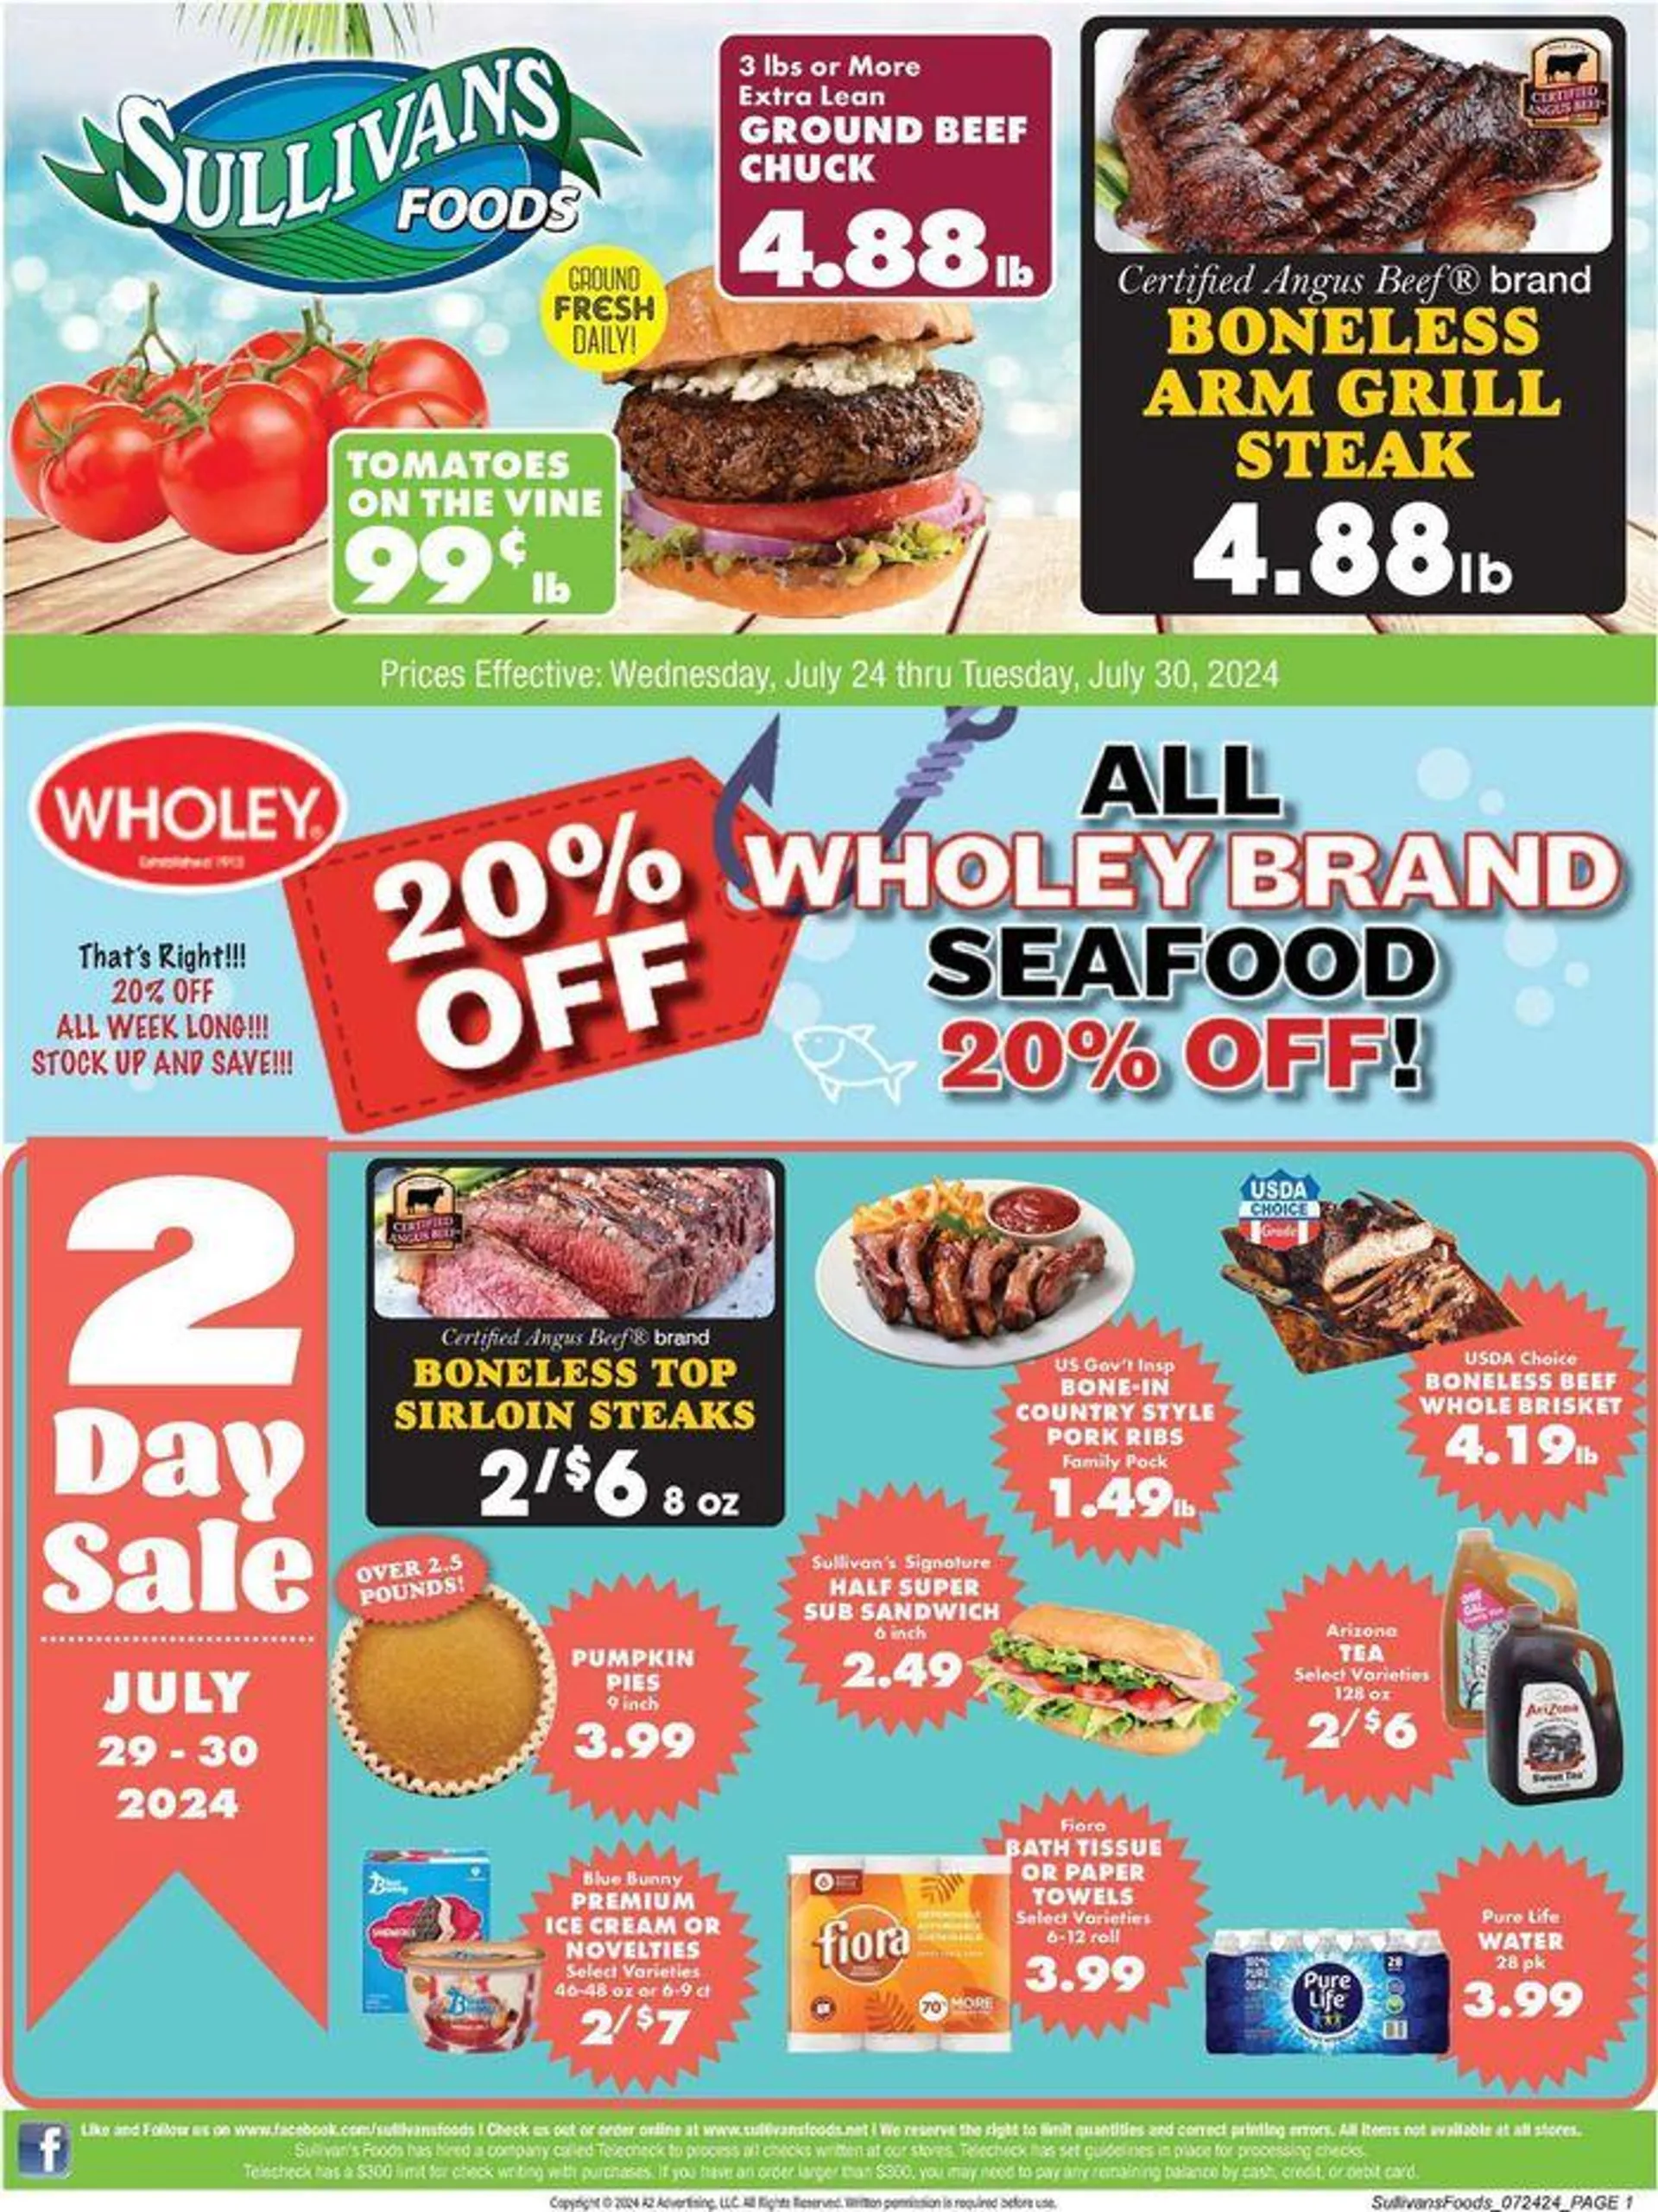 All Wholey brand Seafood 20% Off - 1